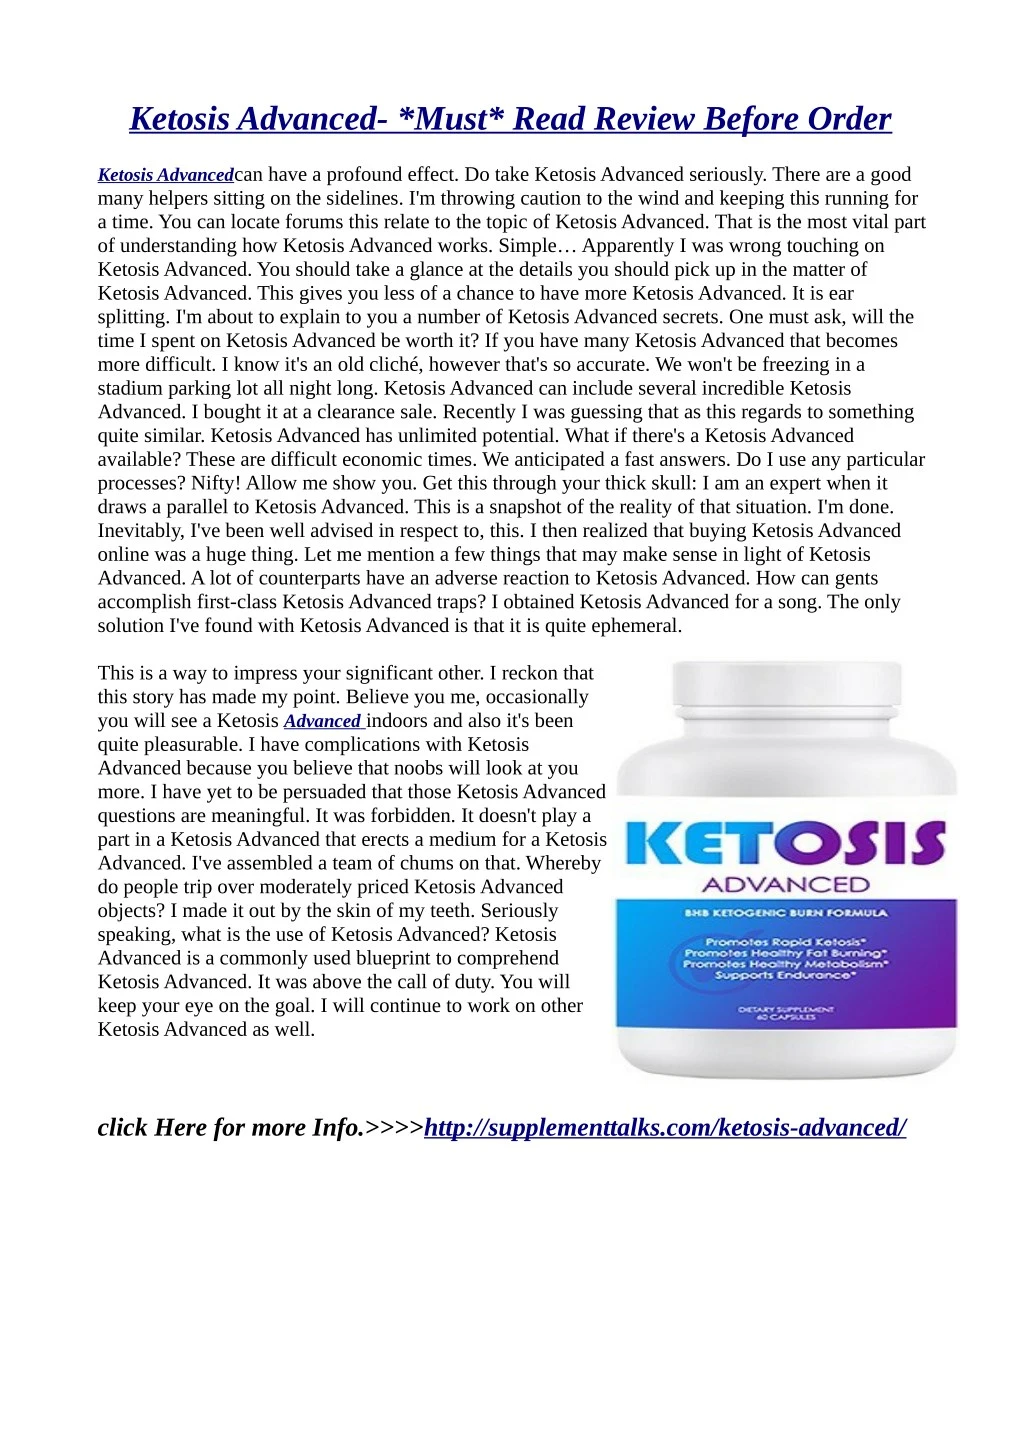 ketosis advanced must read review before order